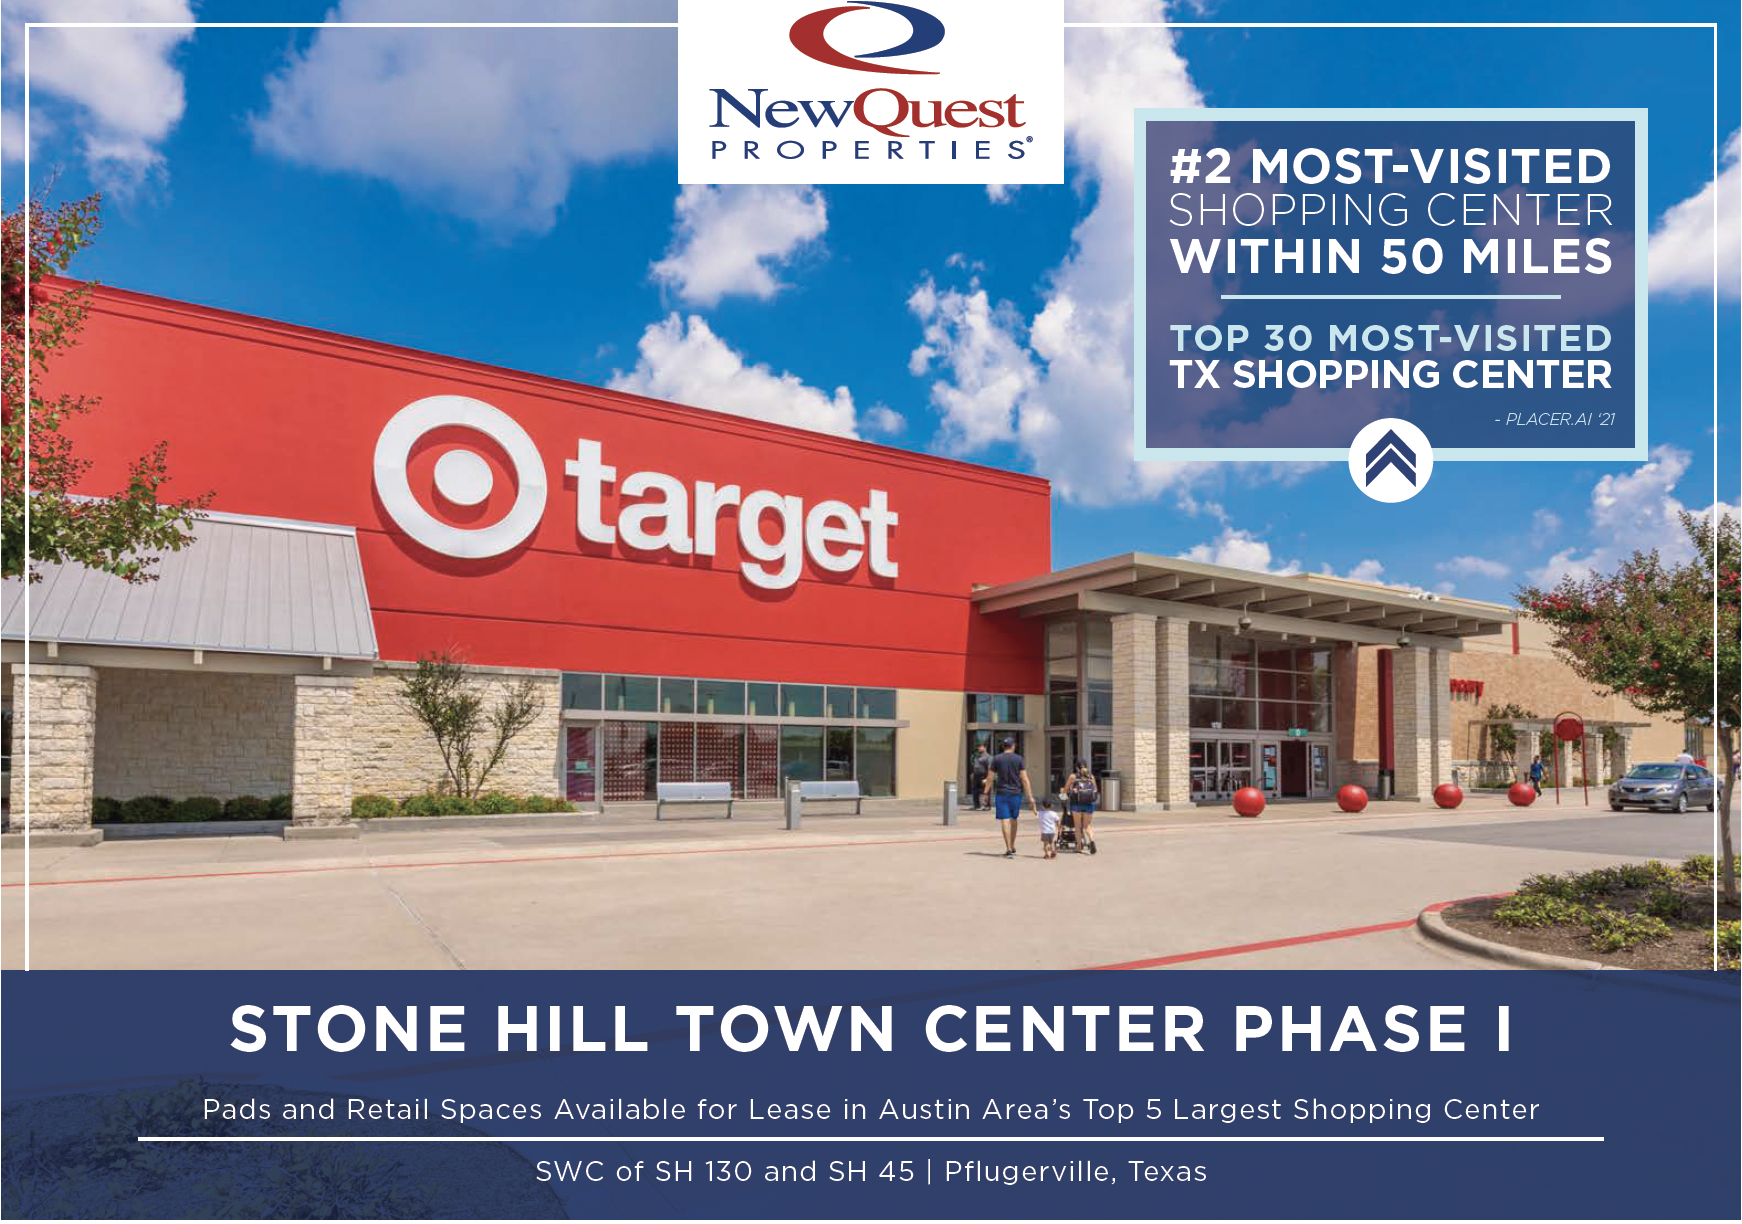 Main Photo For Stone Hill Town Center